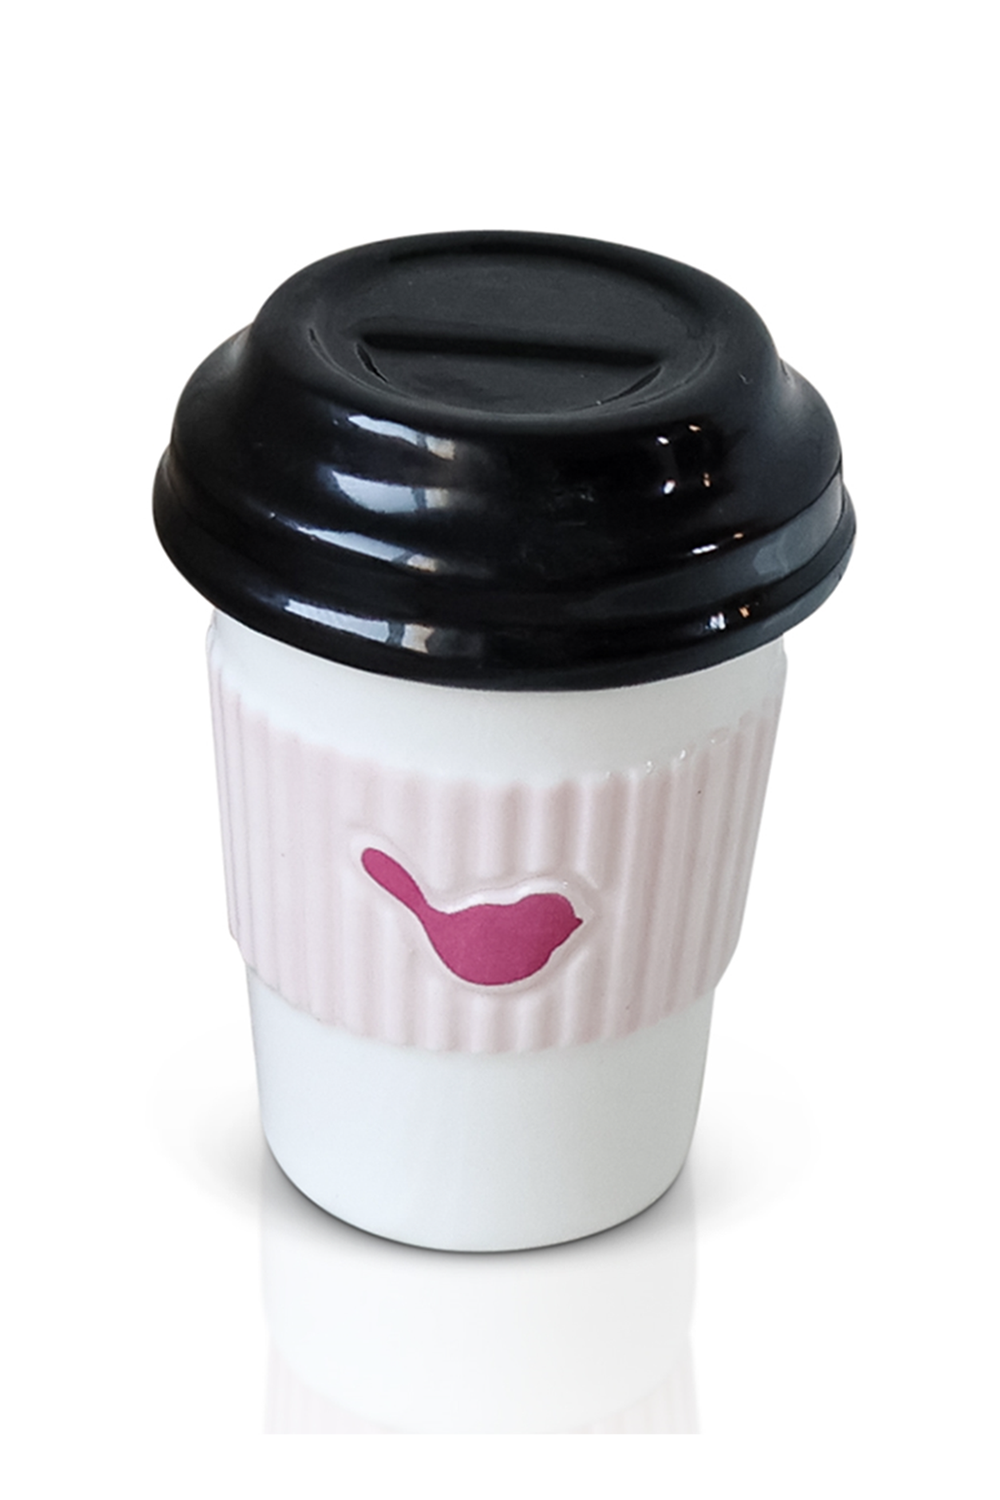 Nora Fleming Mini Attachment - Cup of Ambition